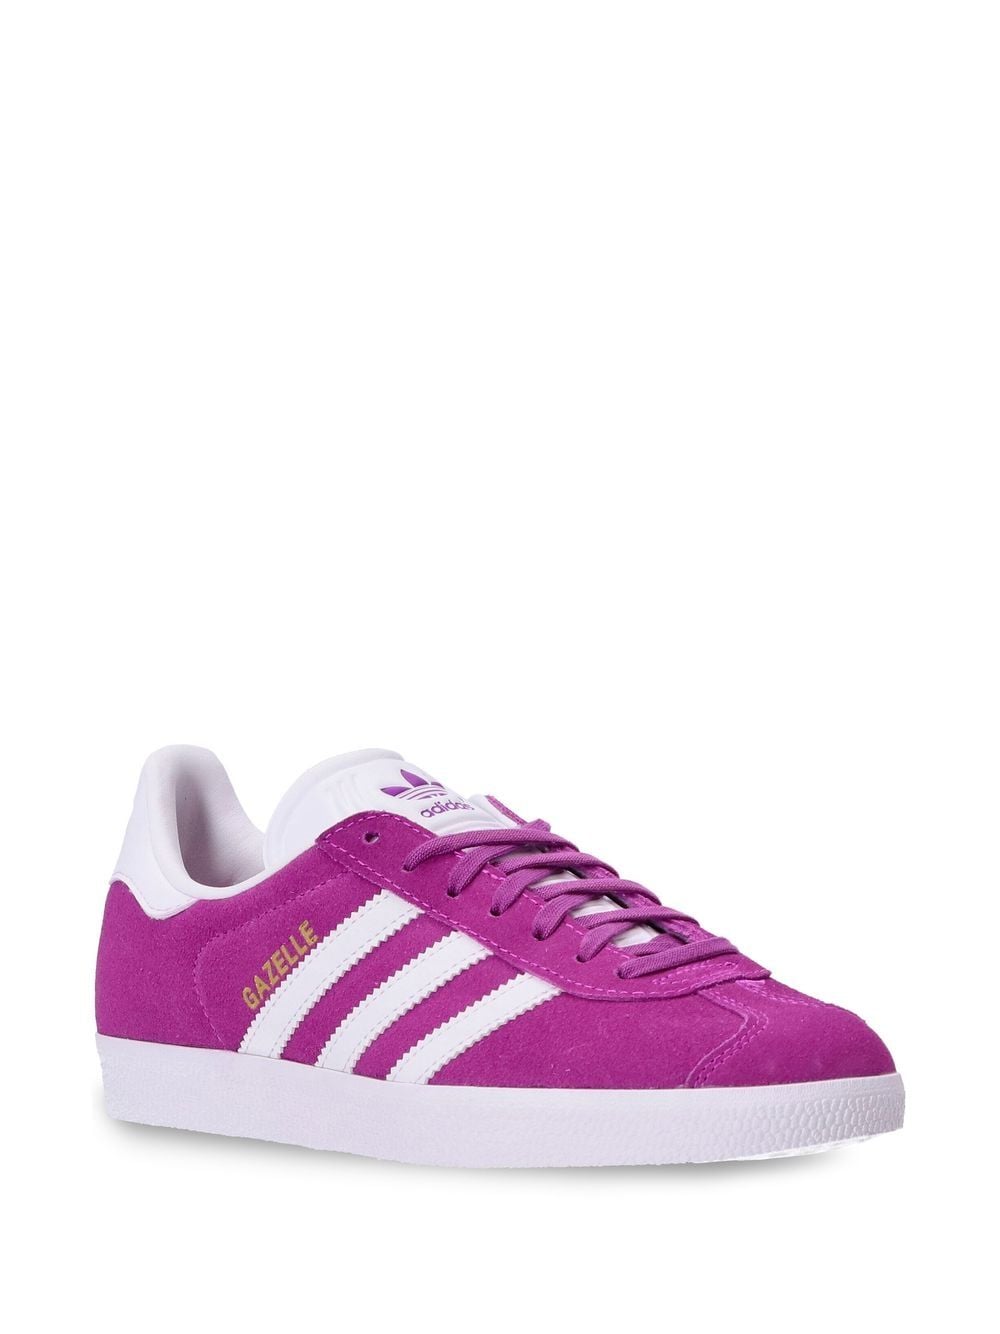 Adidas Originals Gazelle Lace-up Sneakers In Purple | ModeSens